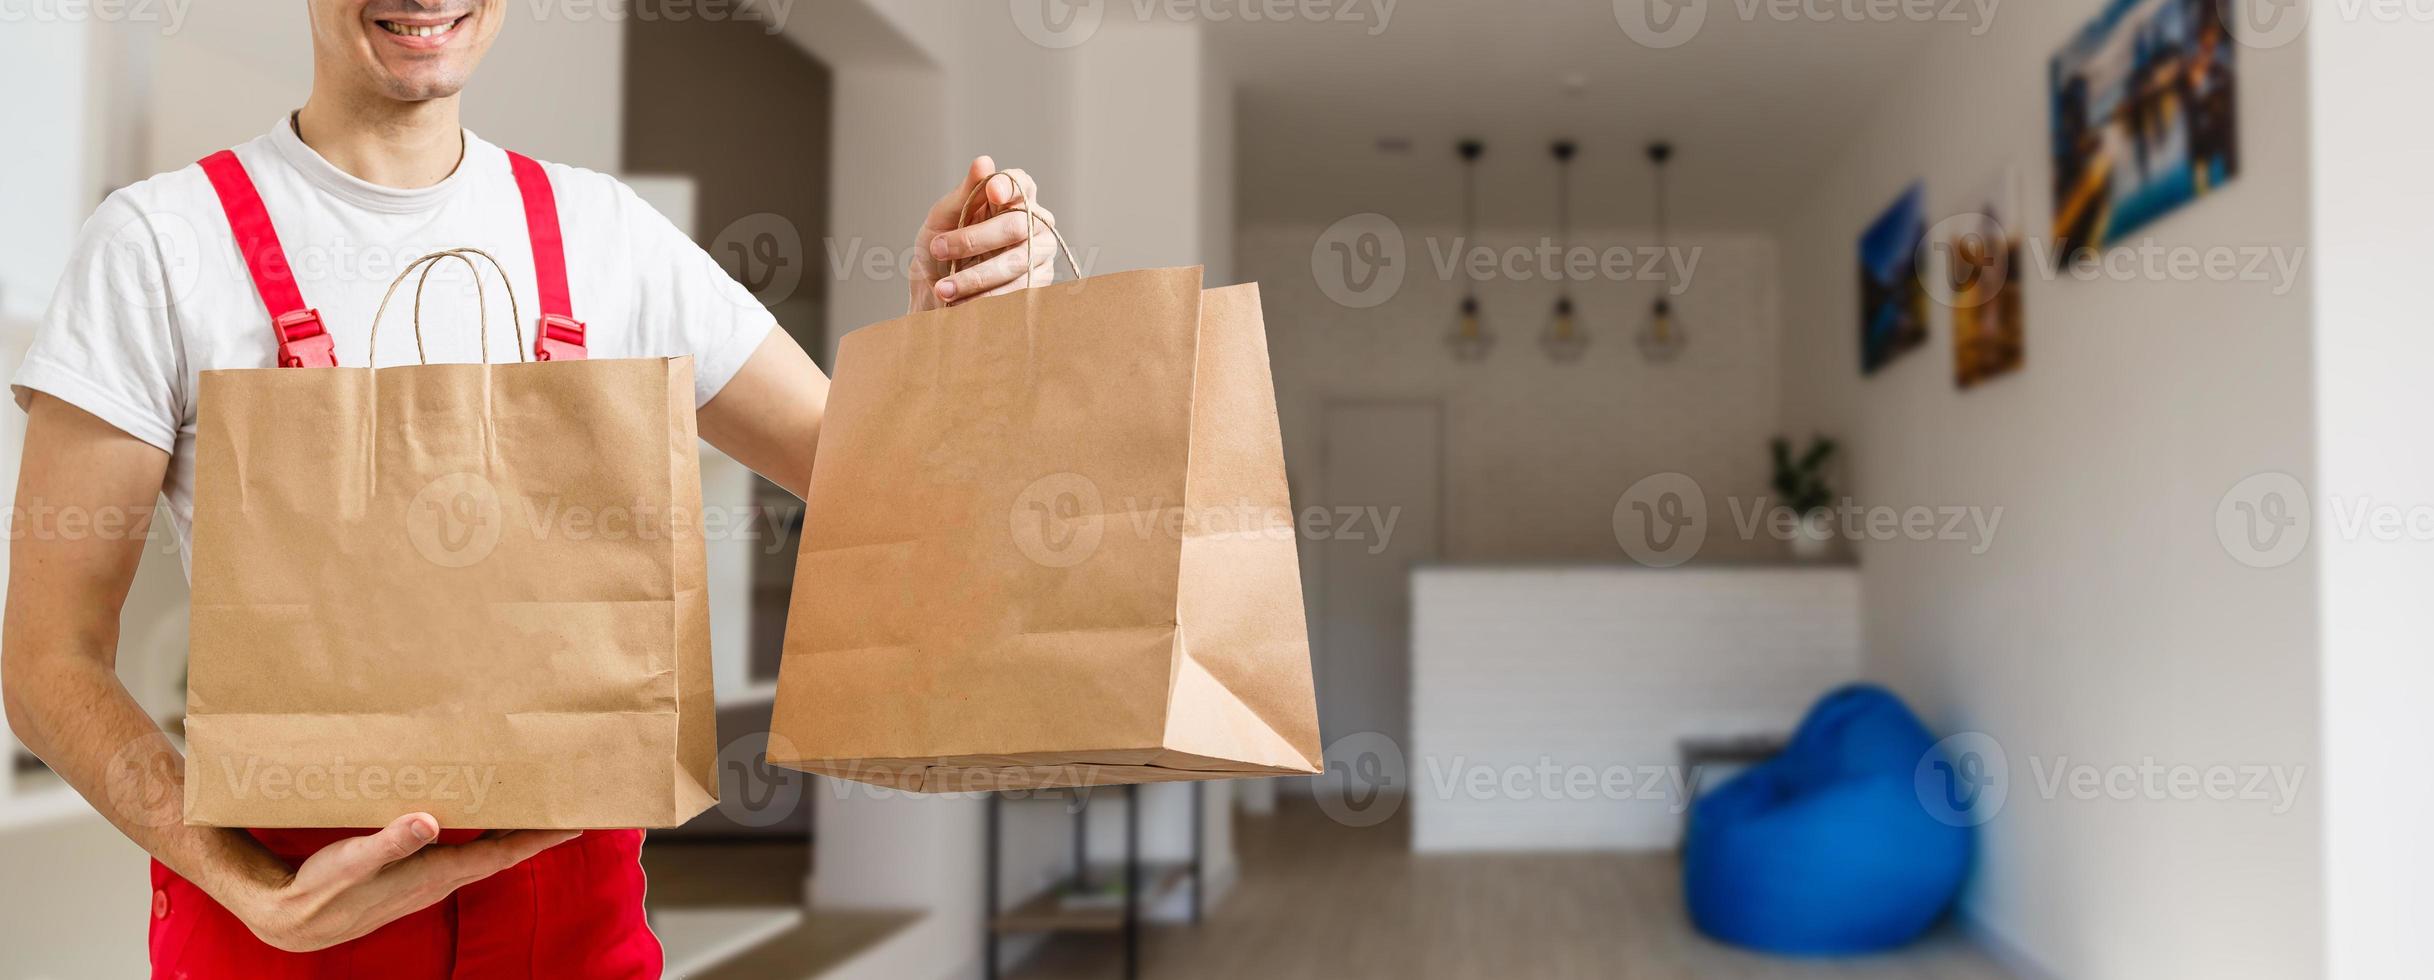 Close up of delivery man carrying boxes in commercial kitchen photo